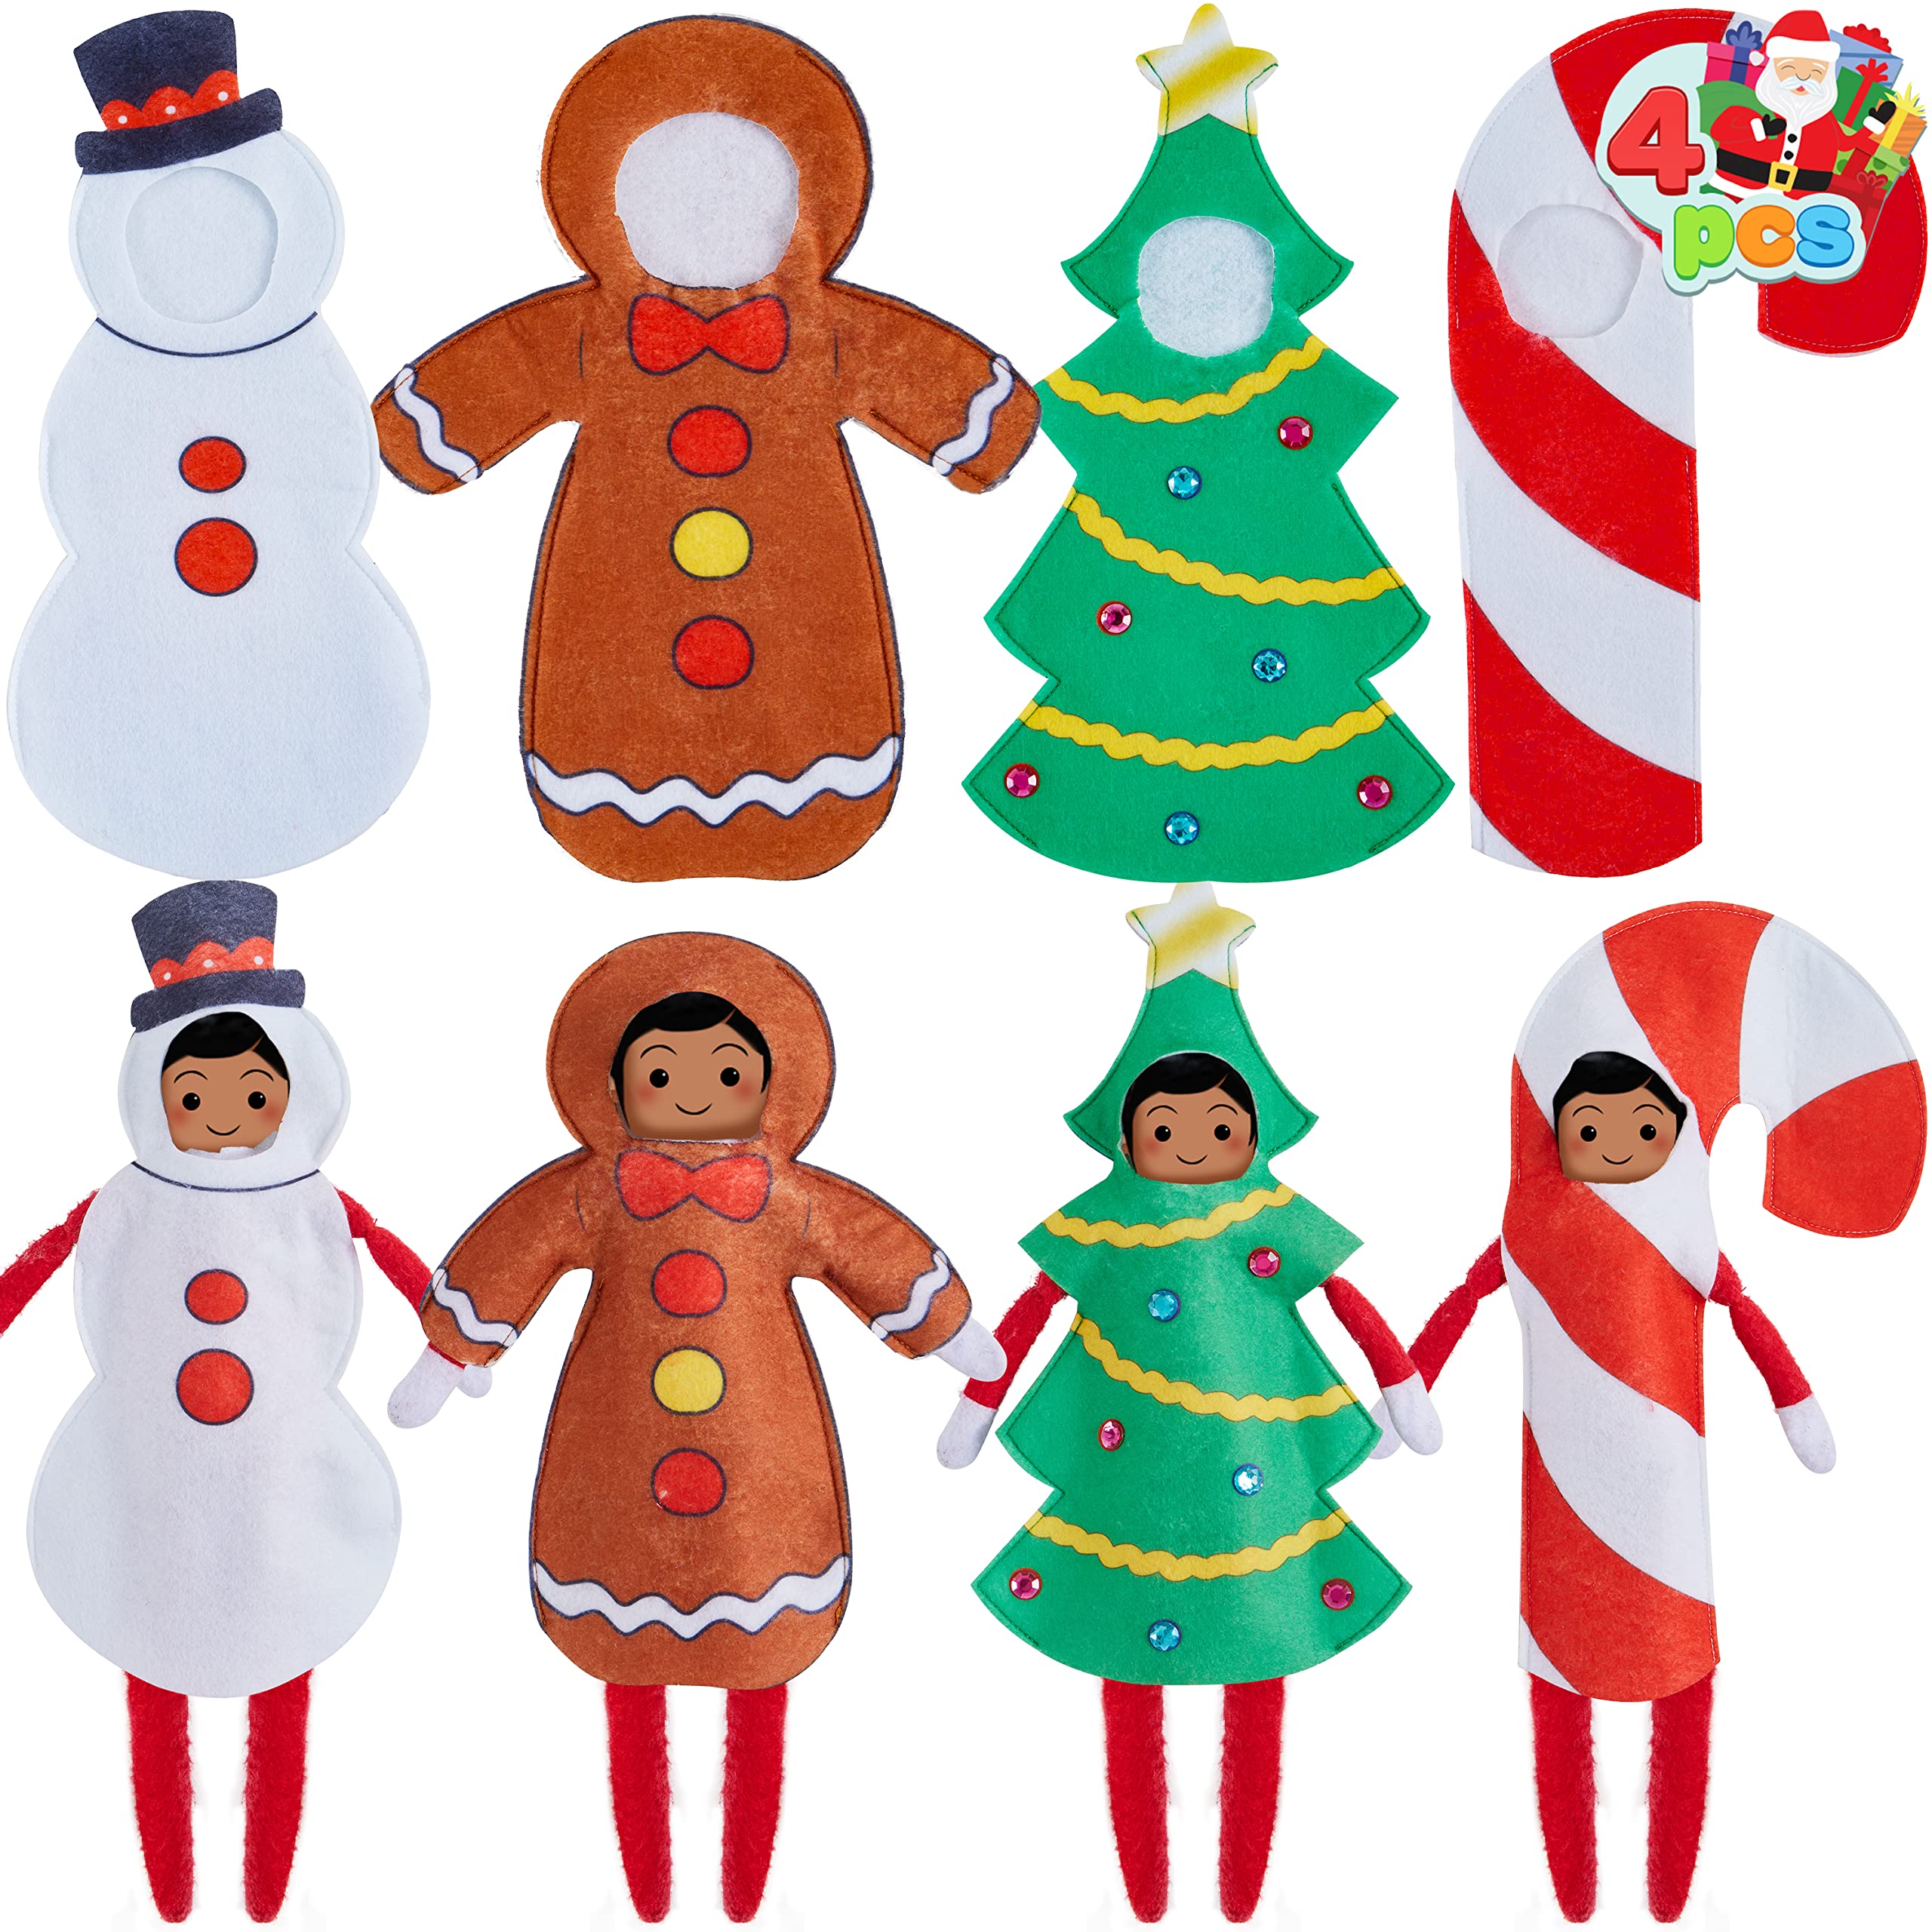 JOYIN 4 Packs Elf Couture Clothing for Elf Doll Christmas Elf Doll Couture with Candy Cane, Christmas Tree, Snowman, and Gingerbread Designs Doll Outfit for Christmas Decor, Holiday Specials